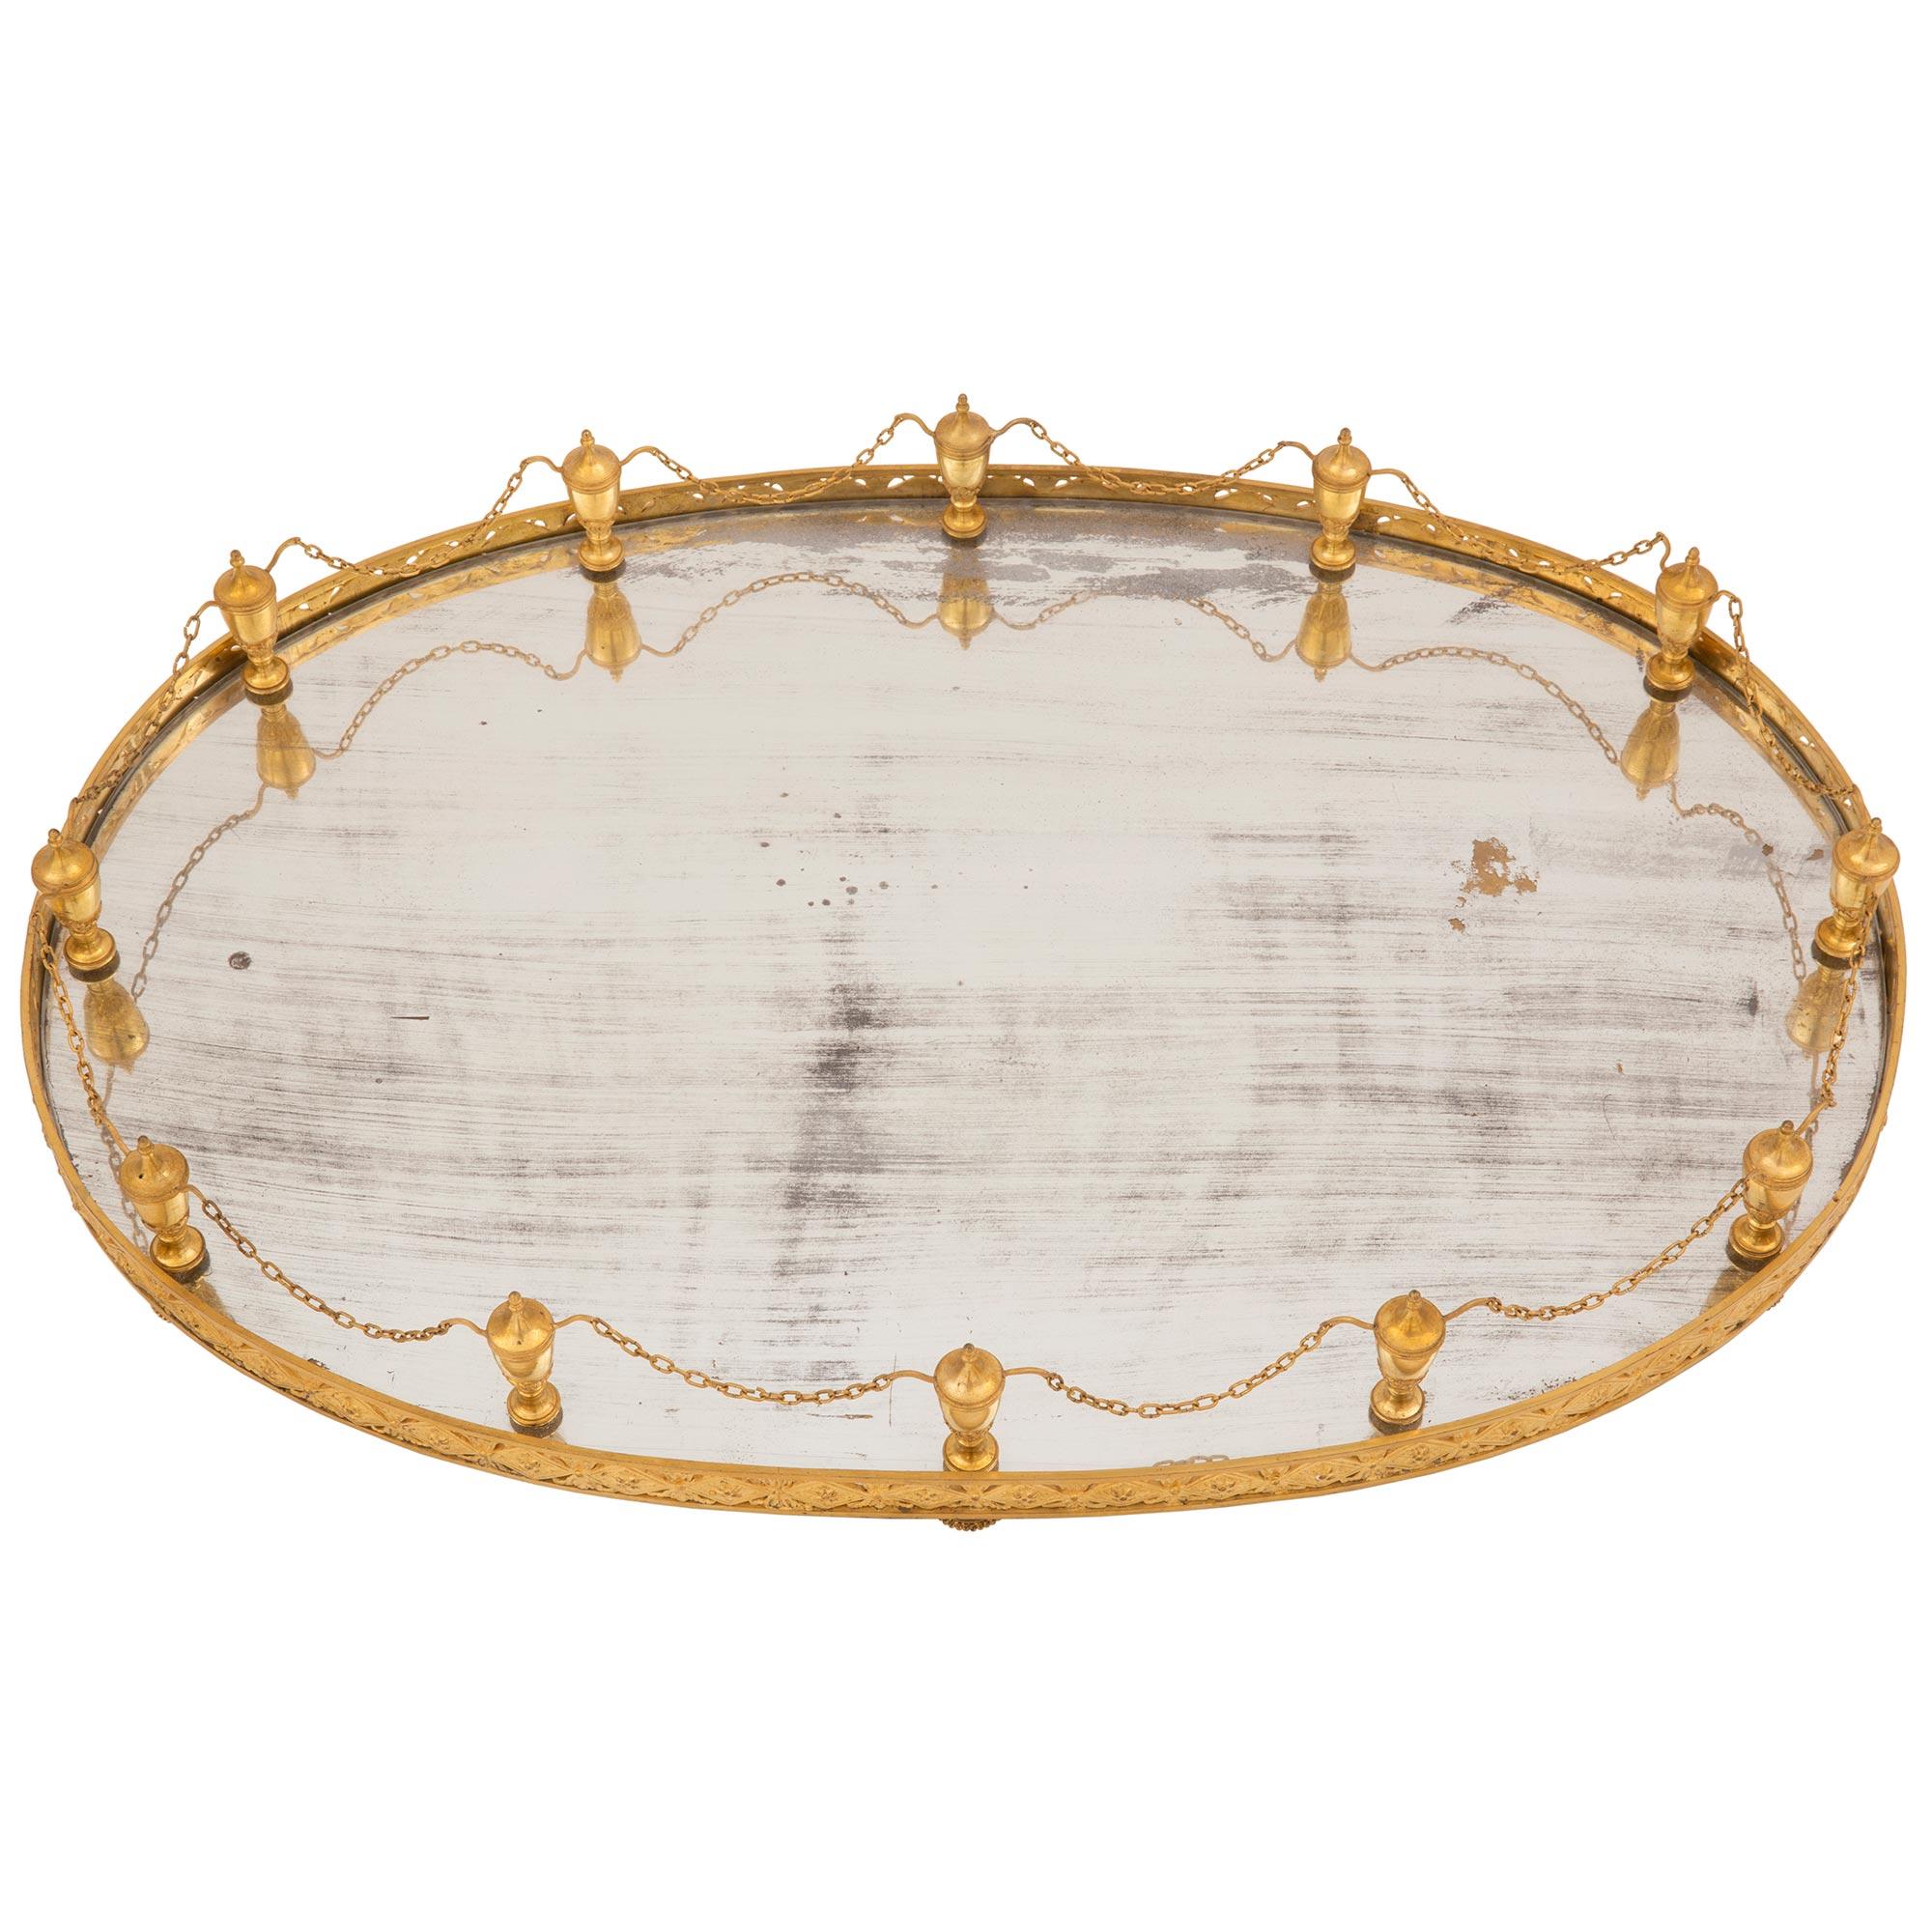 A magnificent French 19th century Louis XVI st. ormolu and mirrored Surtout de Table centerpiece. The centerpiece is raised by ten elegant topie shaped feet with fine beaded designs. The original central mirror plate is framed within a striking